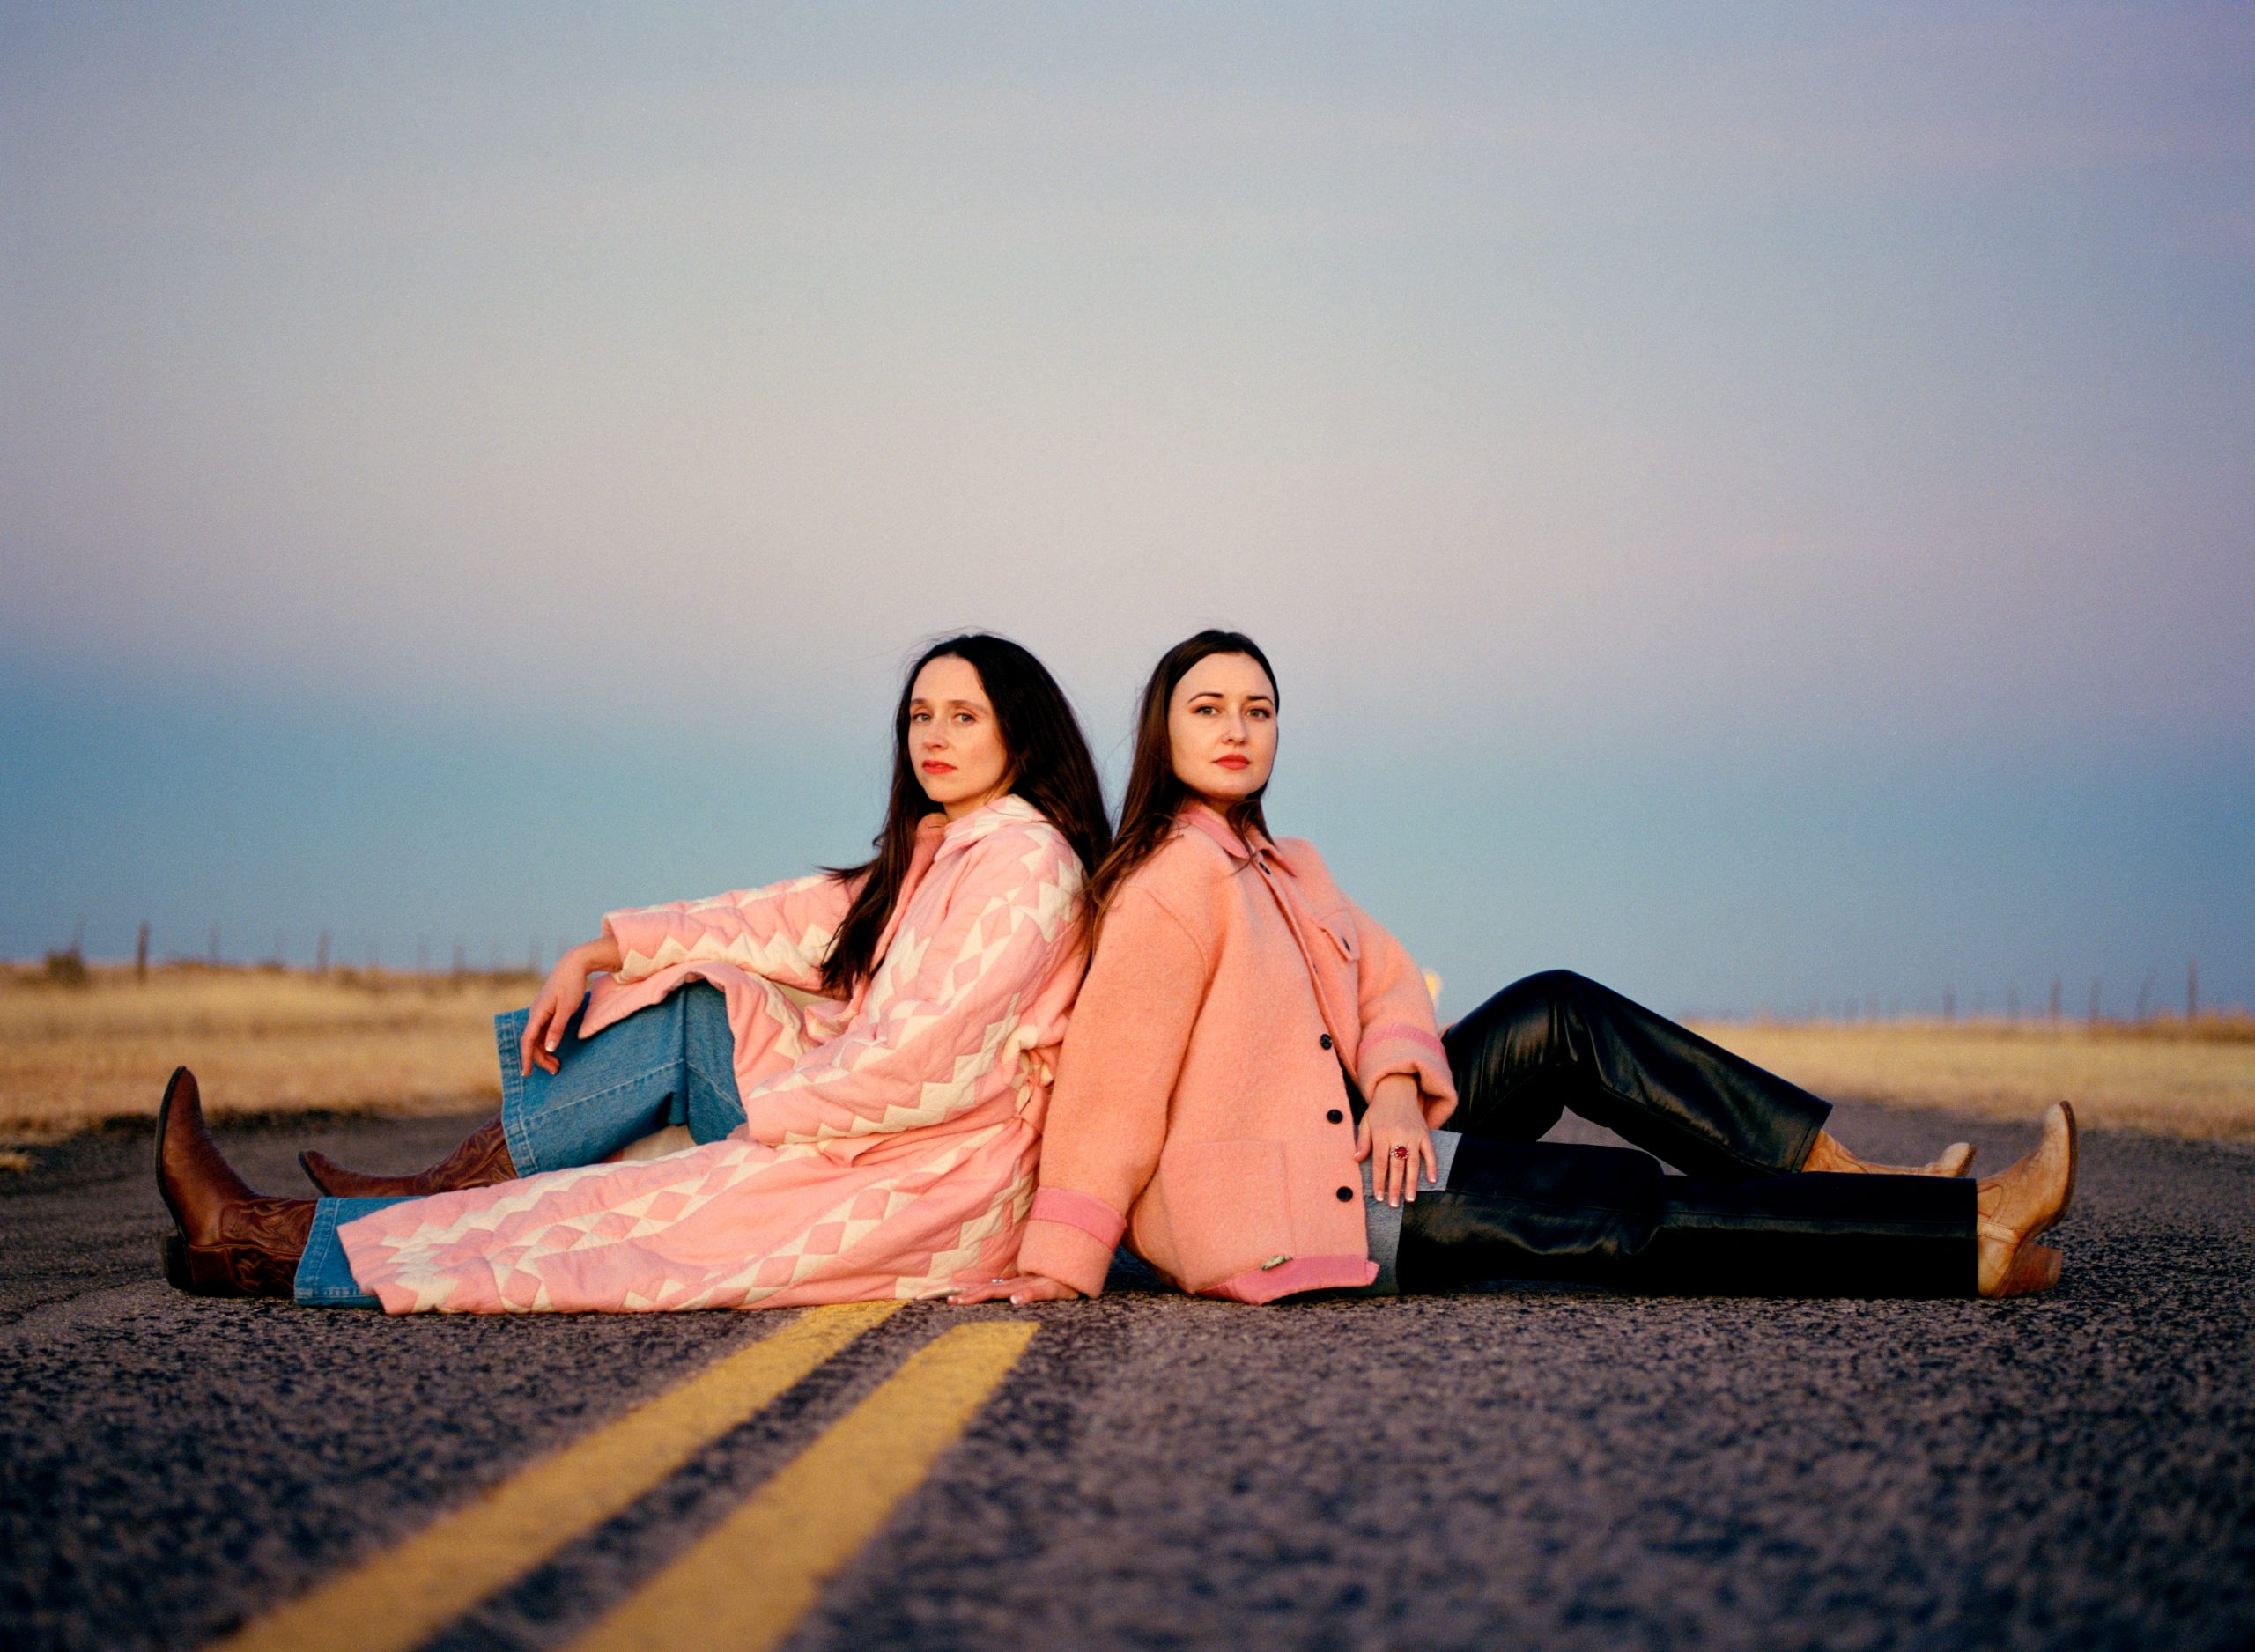 Two women, both wearing pink coats, sit on a road, both facing the camera